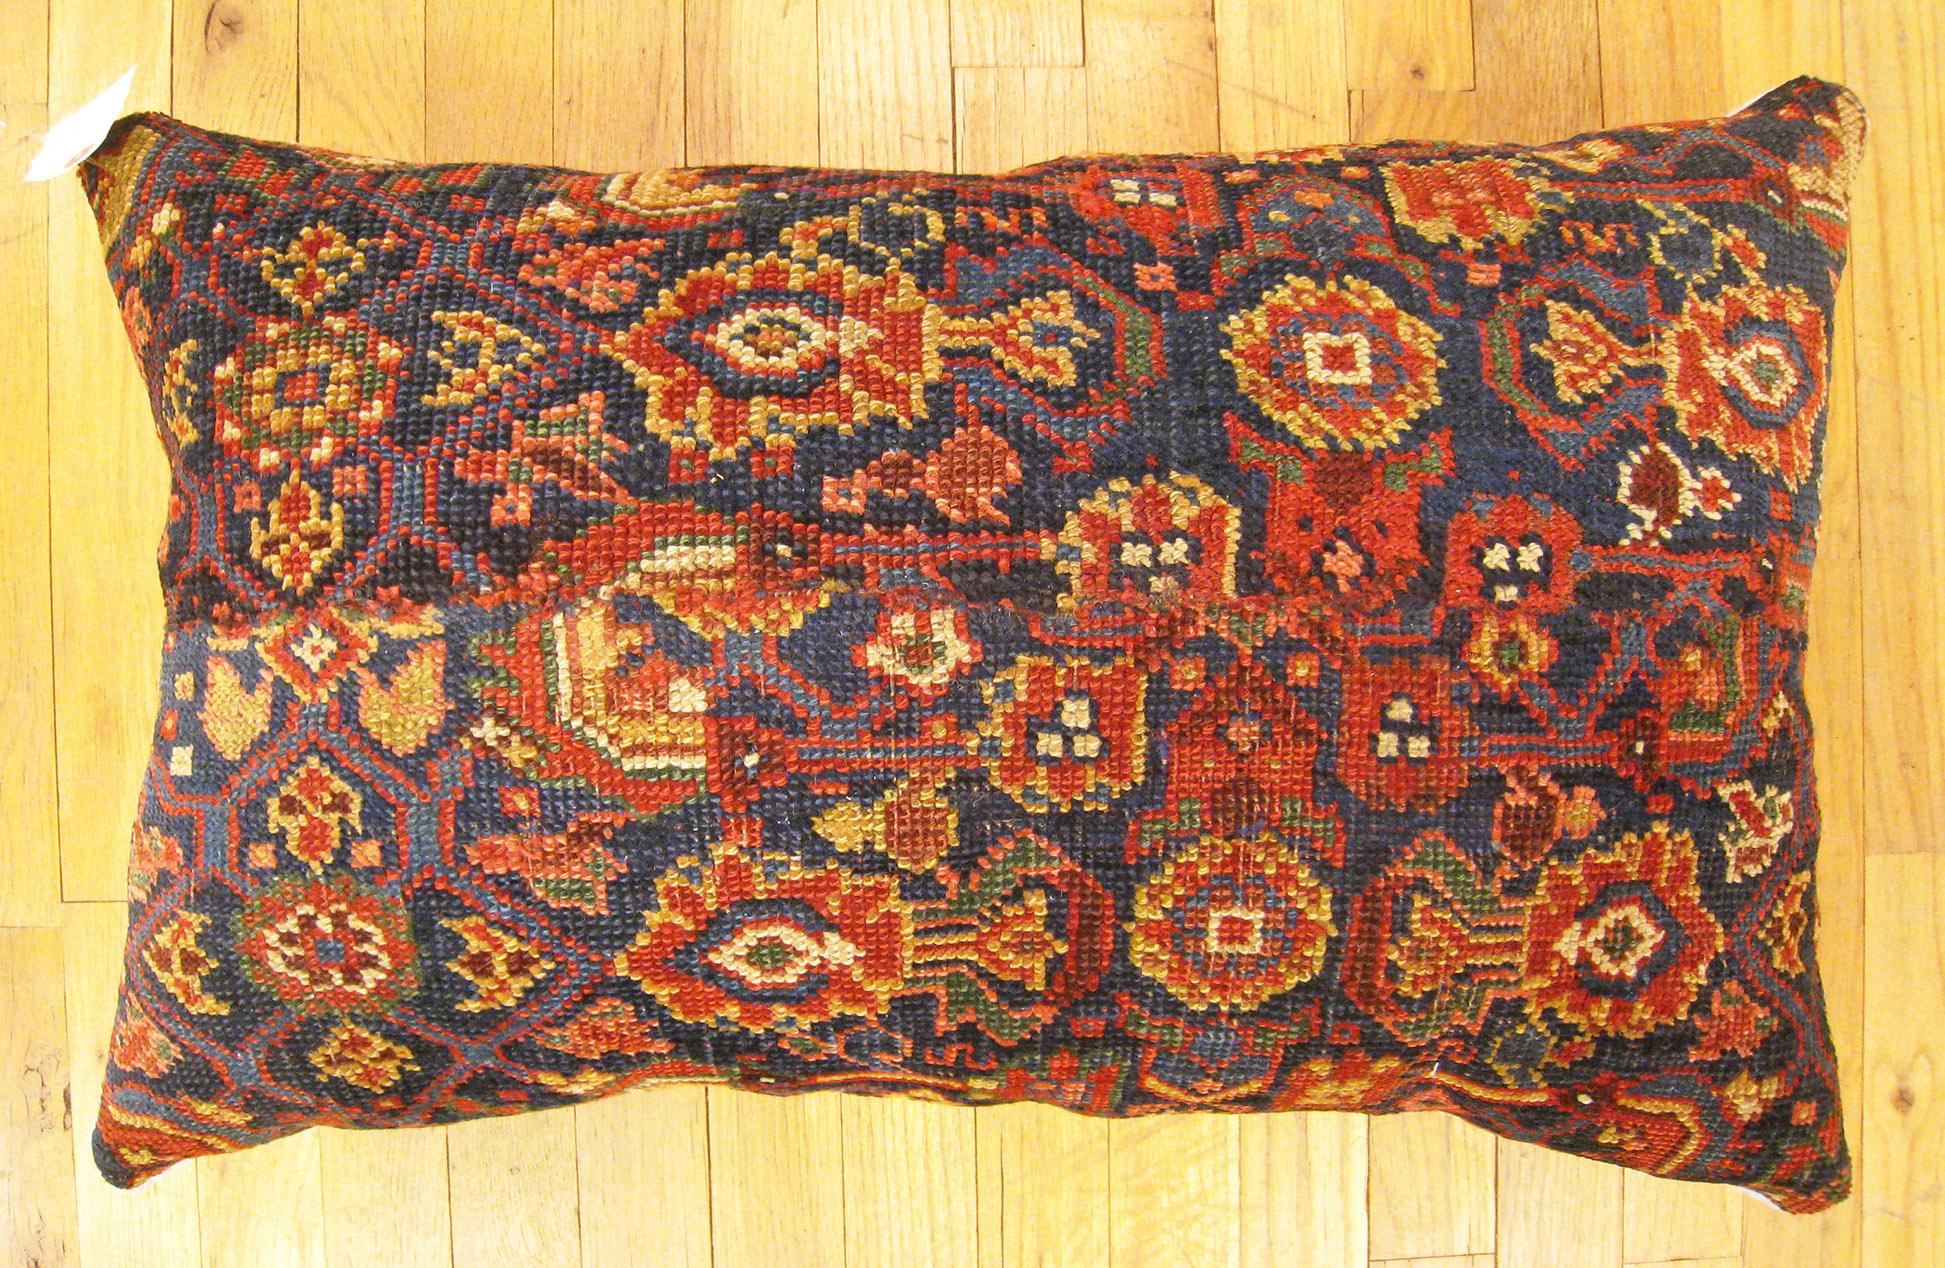 Antique Northwest Persian rug pillow; size 2'2” x 1'6”.

An antique decorative pillow with floral elements in a navy central field, size 2'2” x 1'6”. This lovely decorative pillow features an antique fabric of a Northwest Persian rug on front